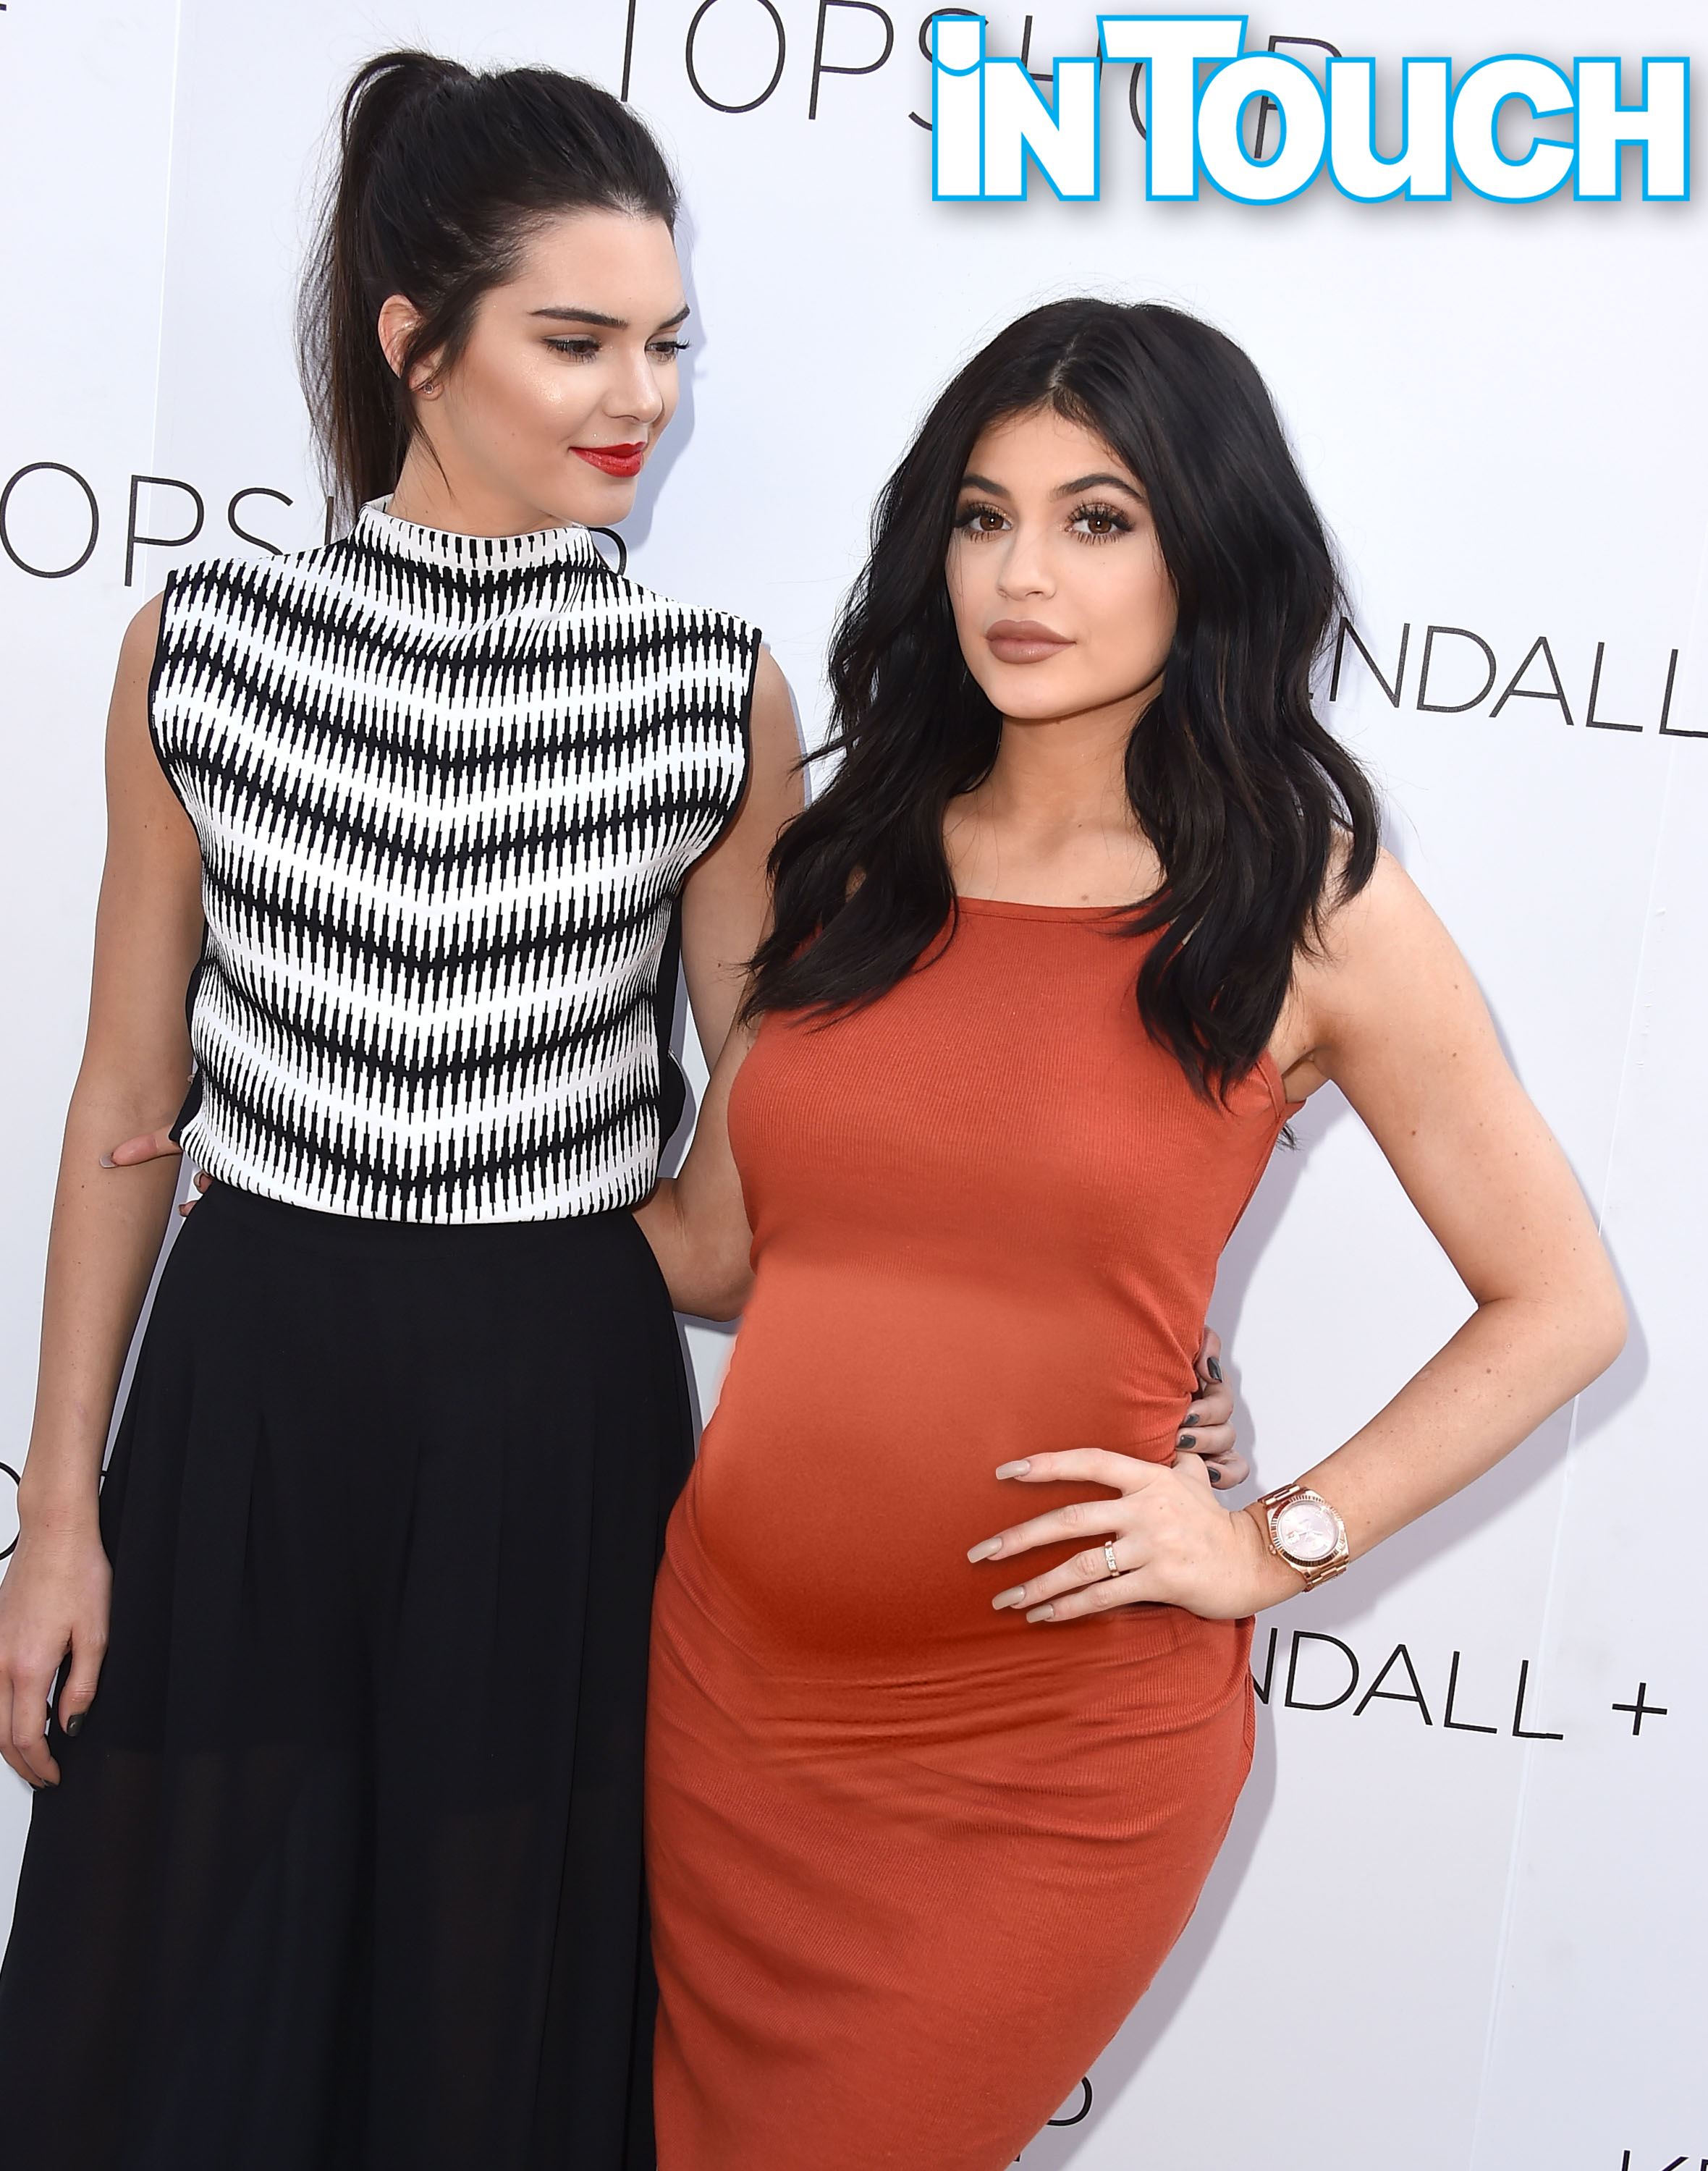 Pregnant Kylie Jenner Pics to Help Come to Terms With the MomToBe